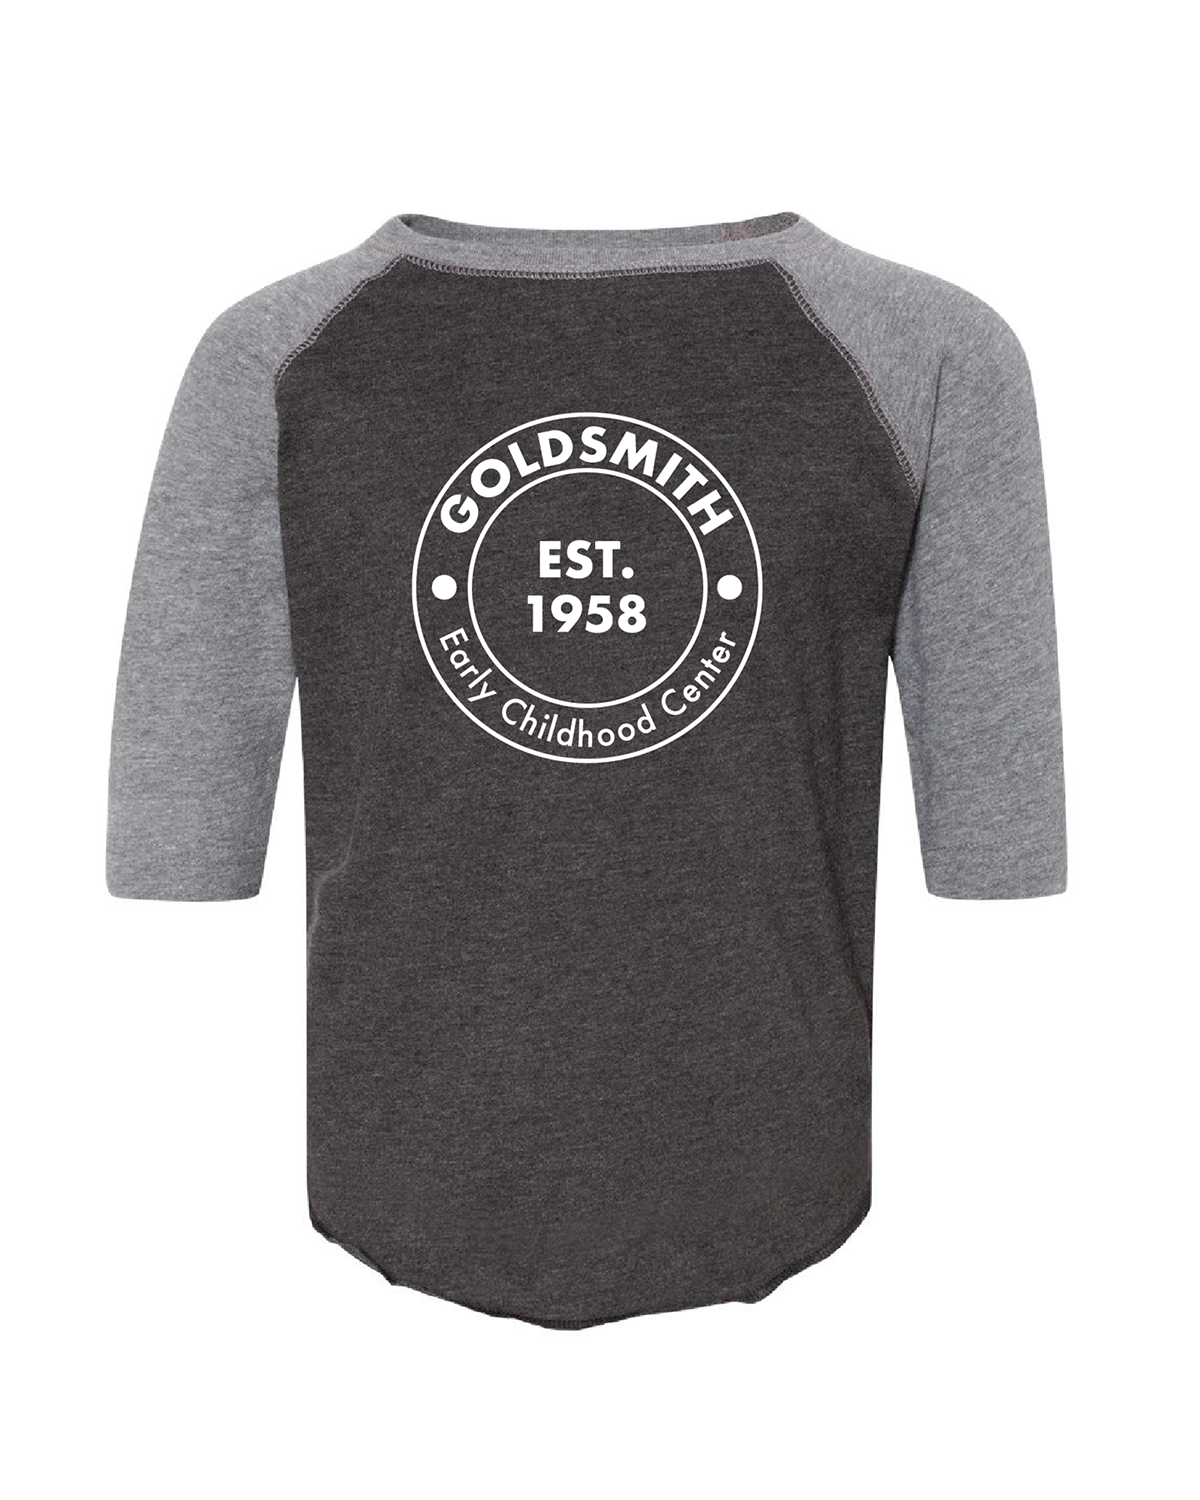 Toddler Baseball Tee (Cotton Fine Jersey) with Round Logo